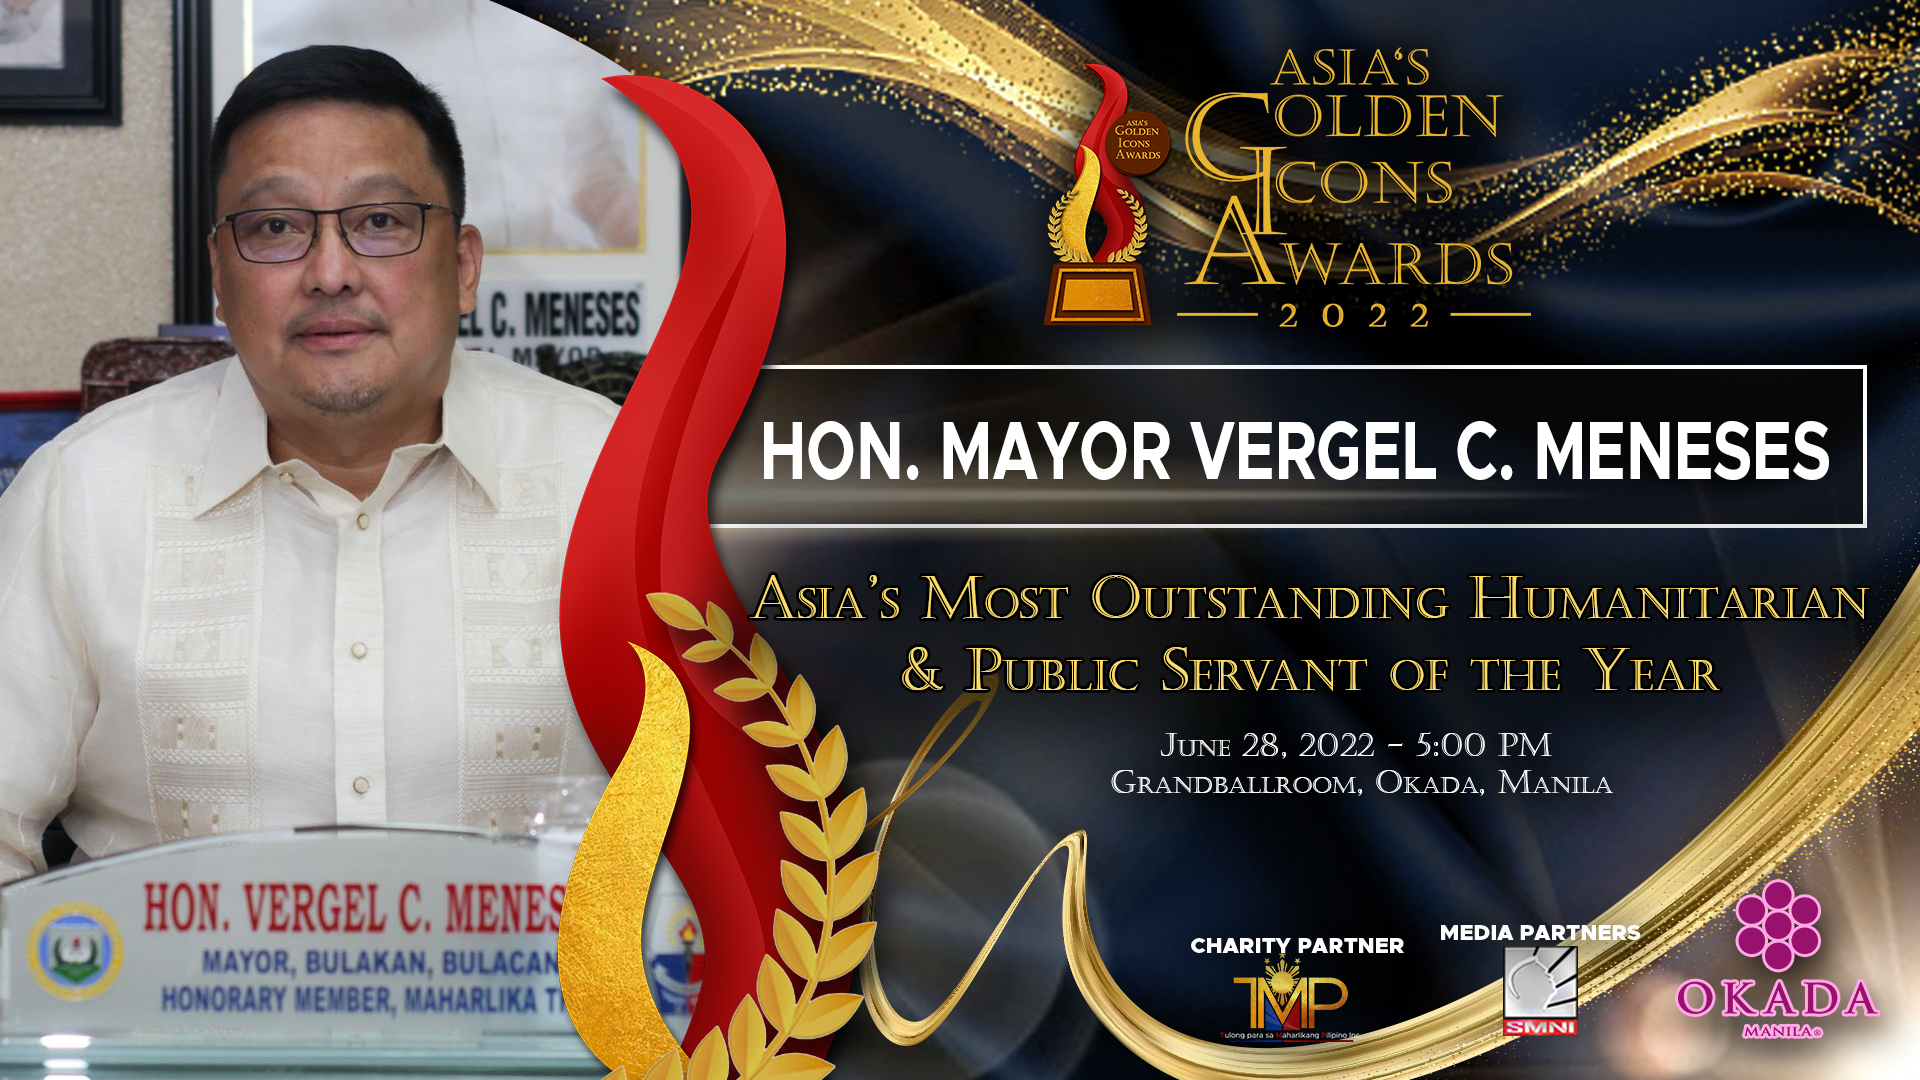 Hon. Mayor Vergel Meneses (Asia's Most Outstanding Humanitarian & Public Servant of the Year)